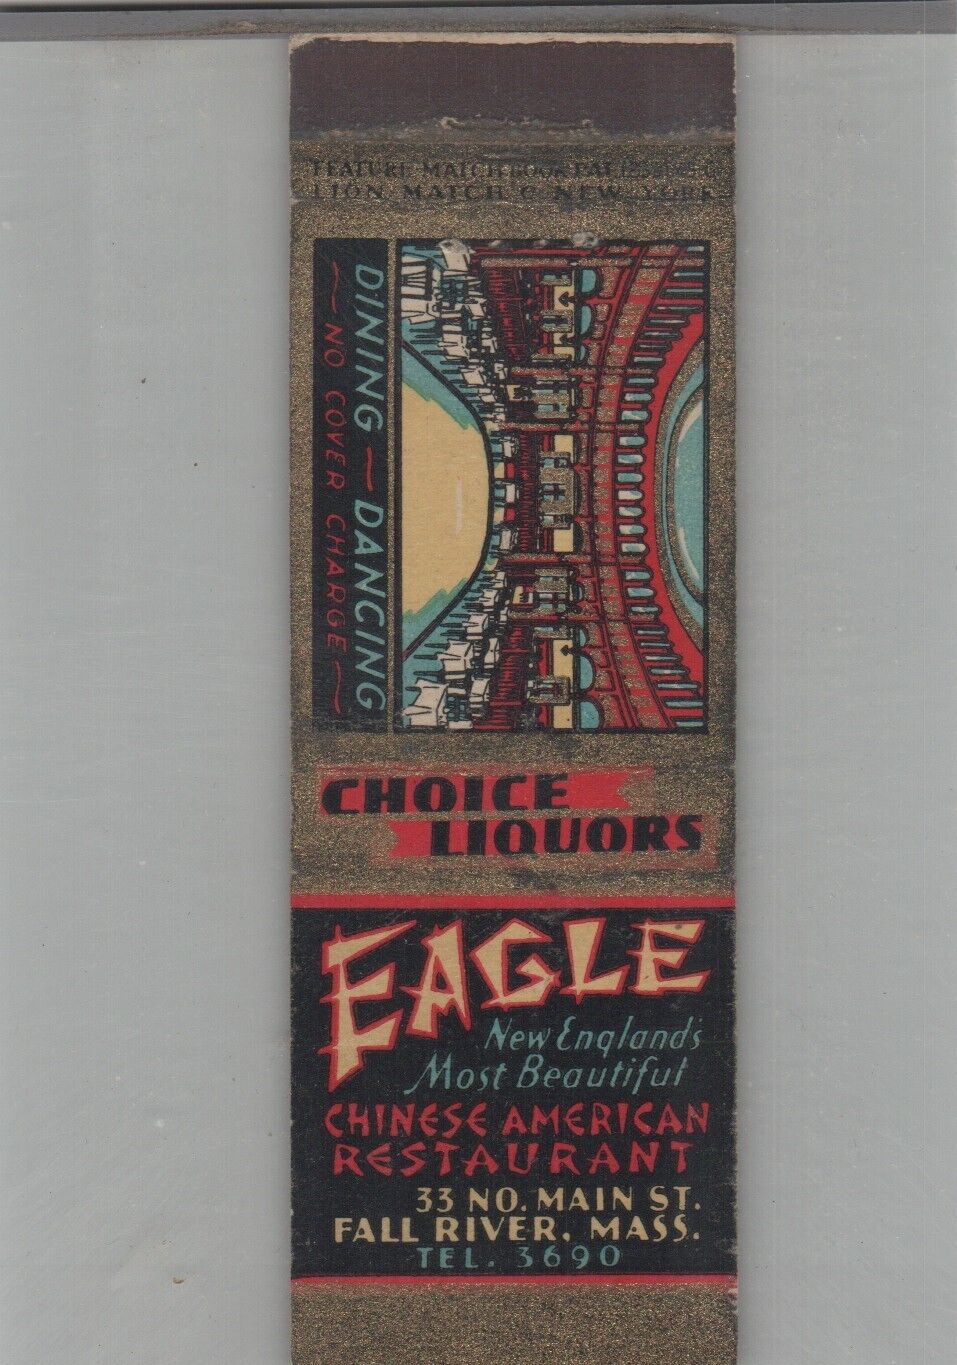 Matchbook Cover Eagle Chinese American Restaurant Fall River, MA